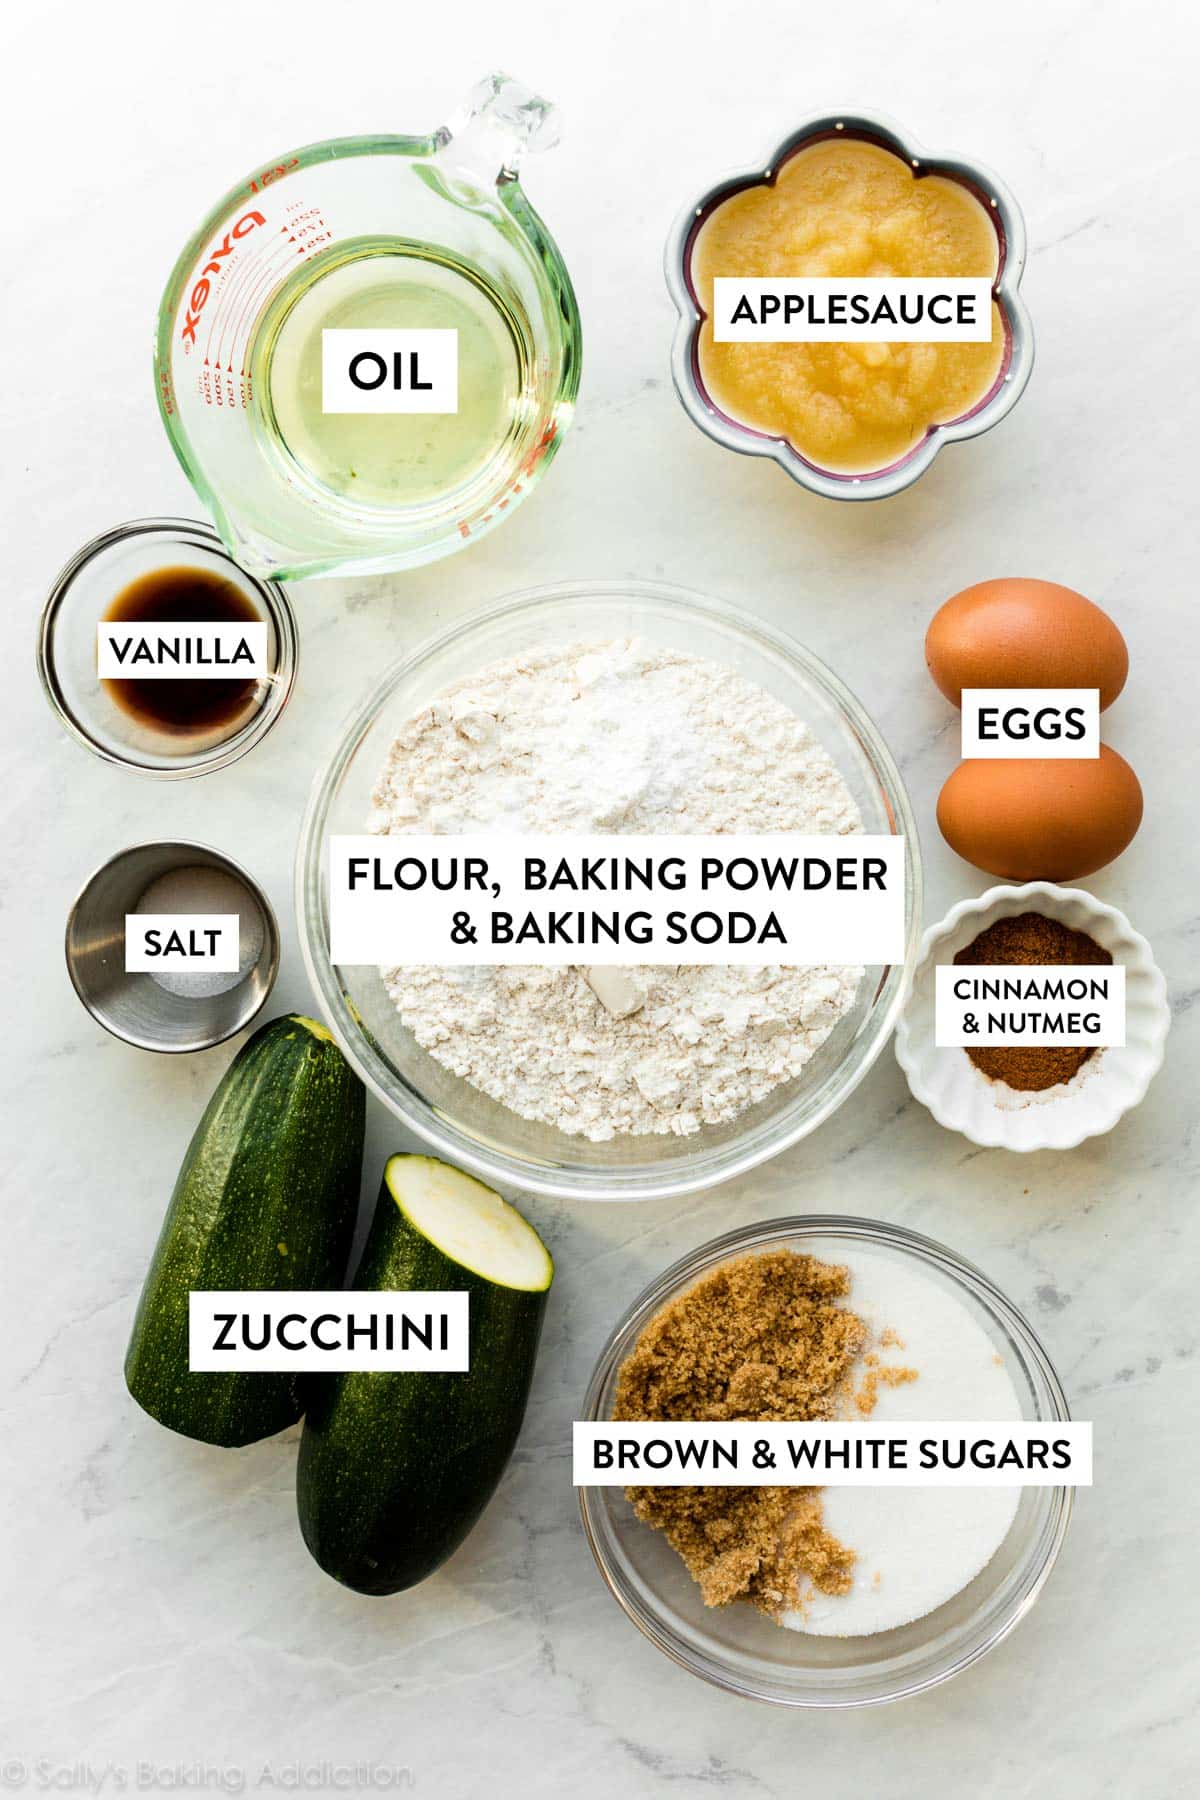 image showing ingredients including bowl of flour, baking powder, and baking soda plus eggs, oil, and zucchini